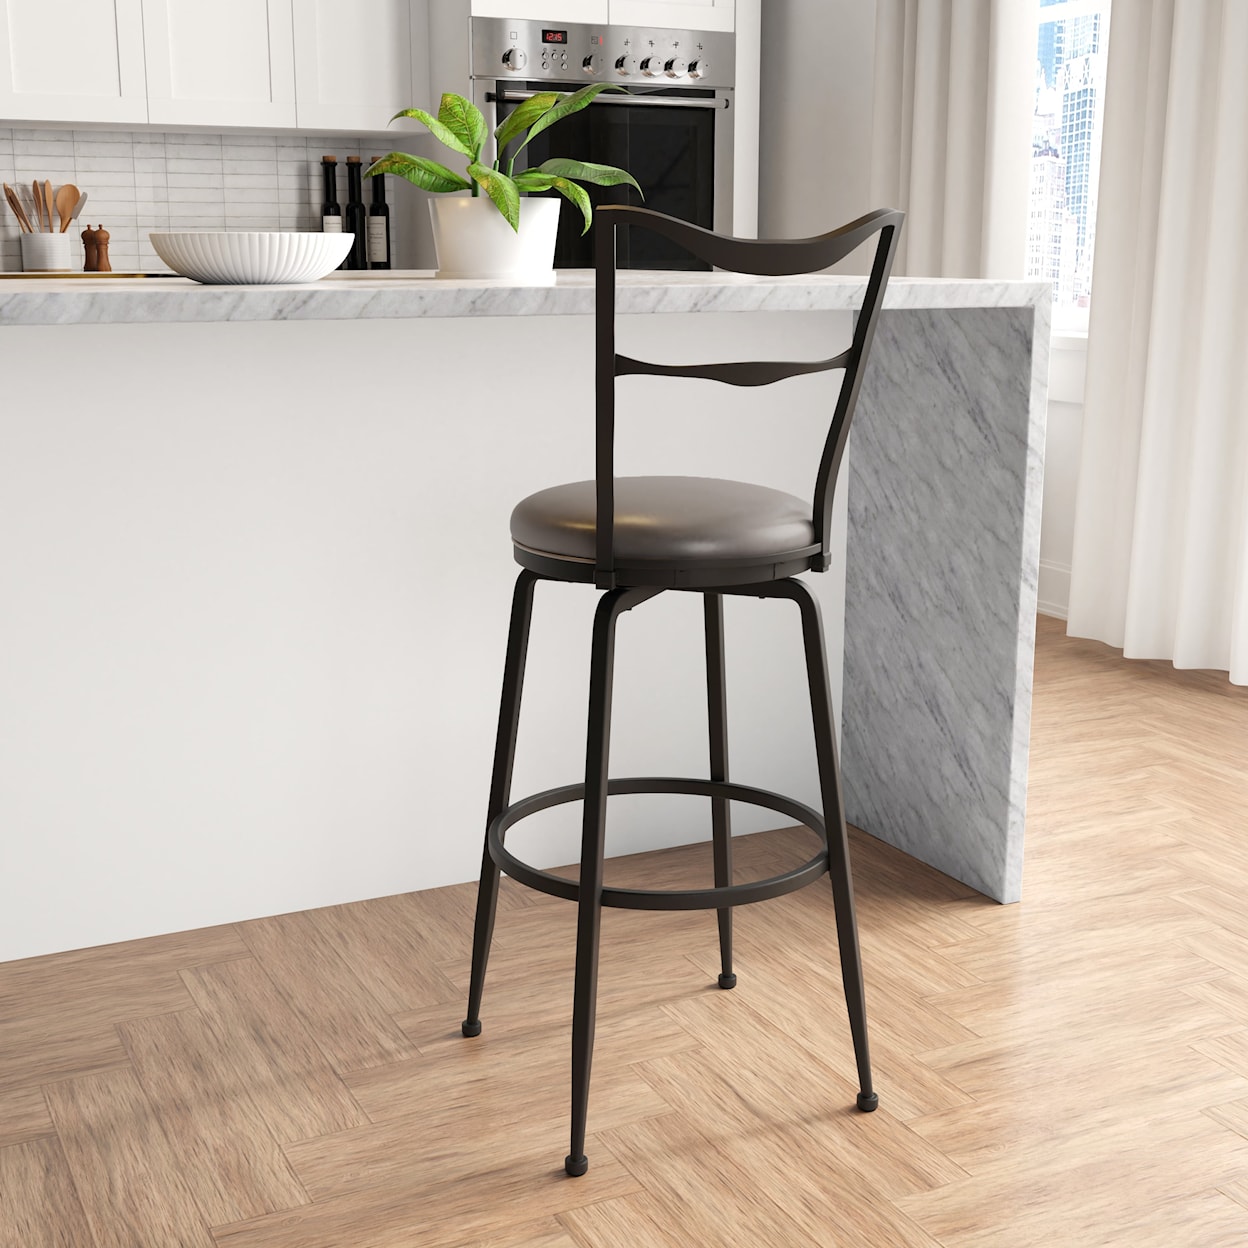 Hillsdale Larimore Counter and Bar Stools